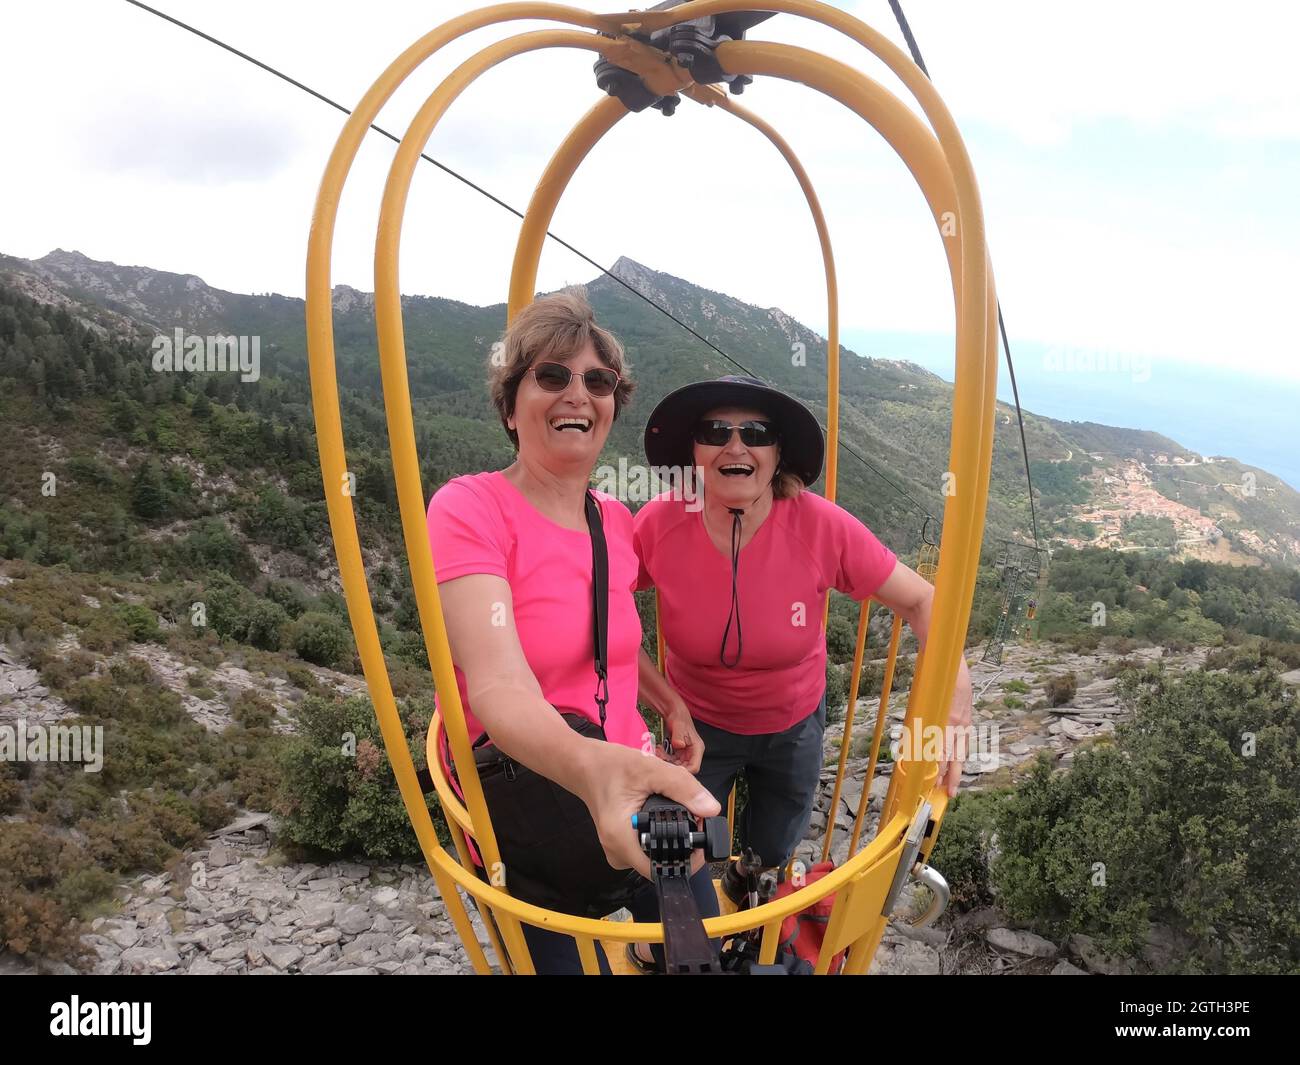 Senior Women Enjoying Cable Car Ride In Yellow Basket From The Top Of Elba  Island Stock Photo - Alamy